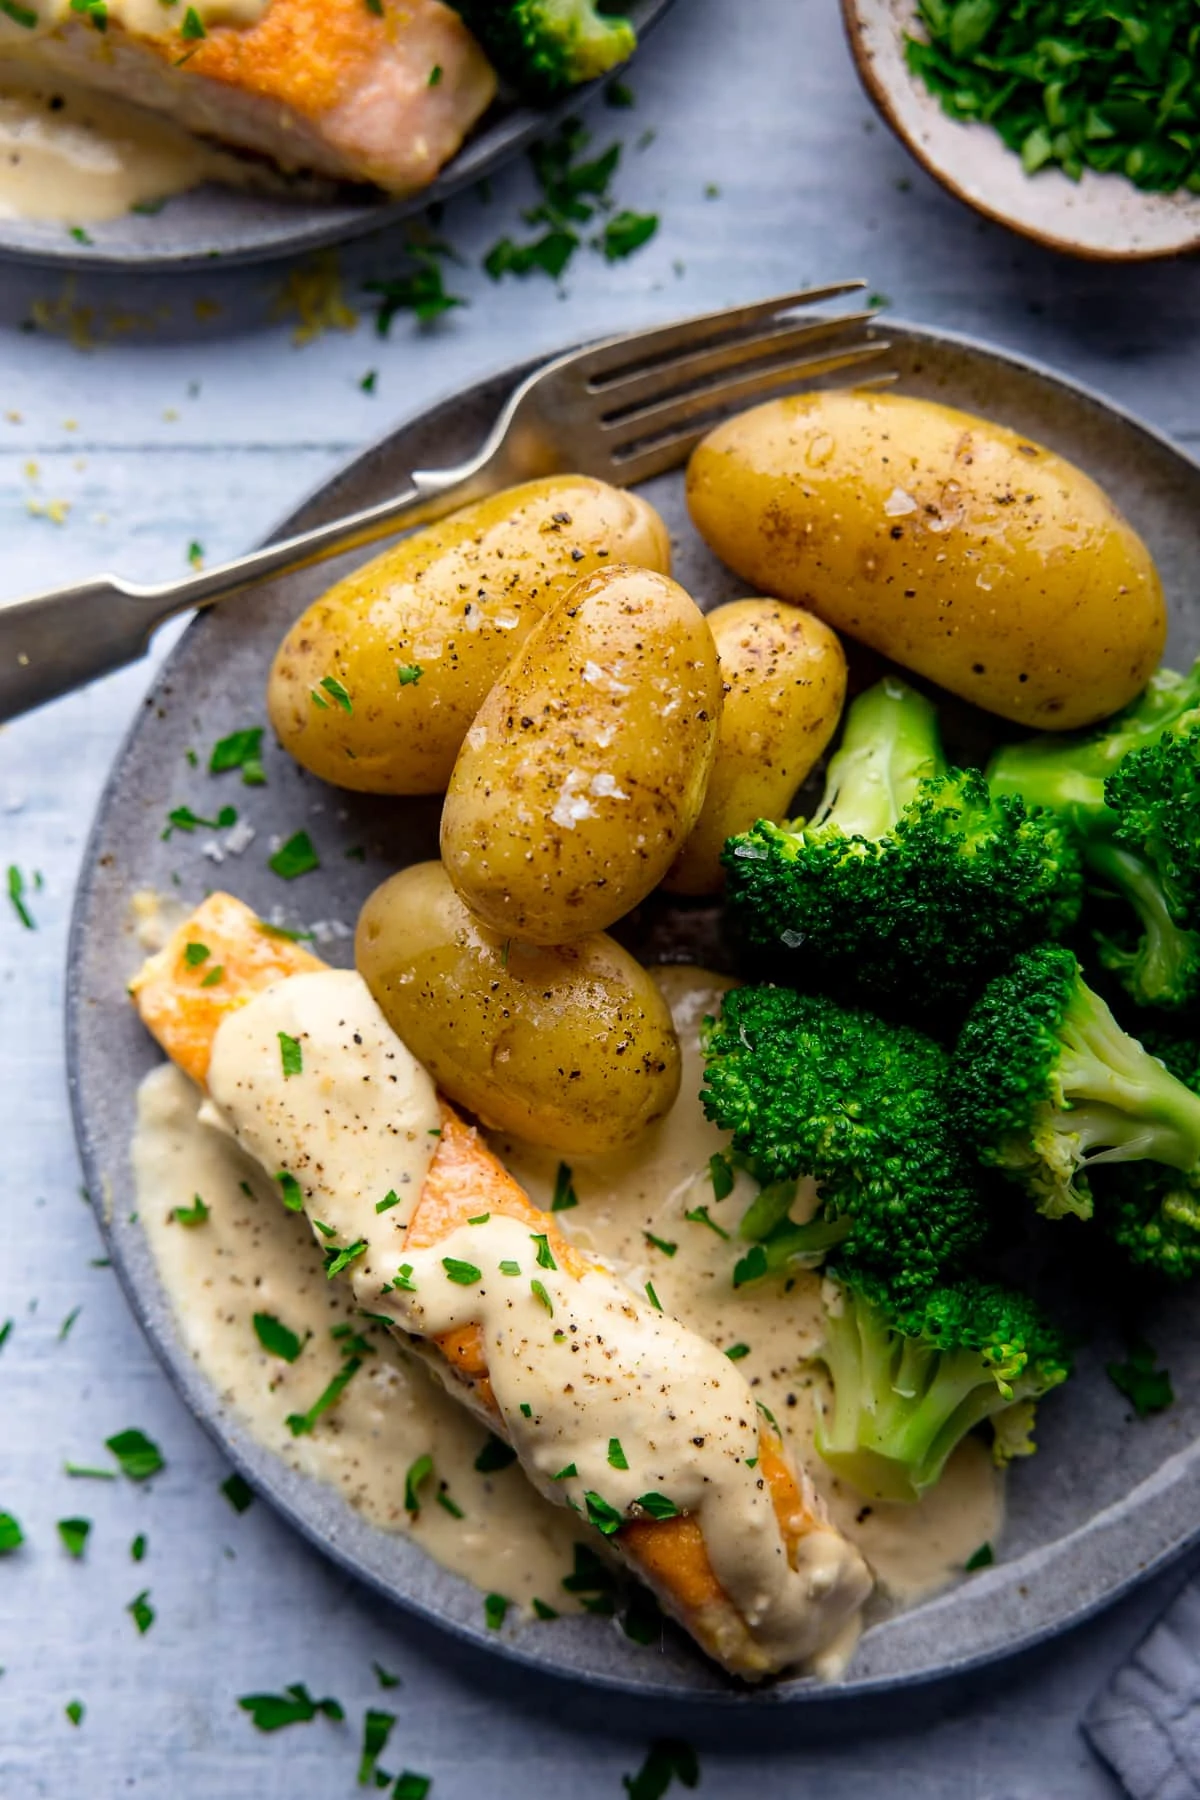 Salmon in cream sauce, broccoli and potatoes on a grey plate